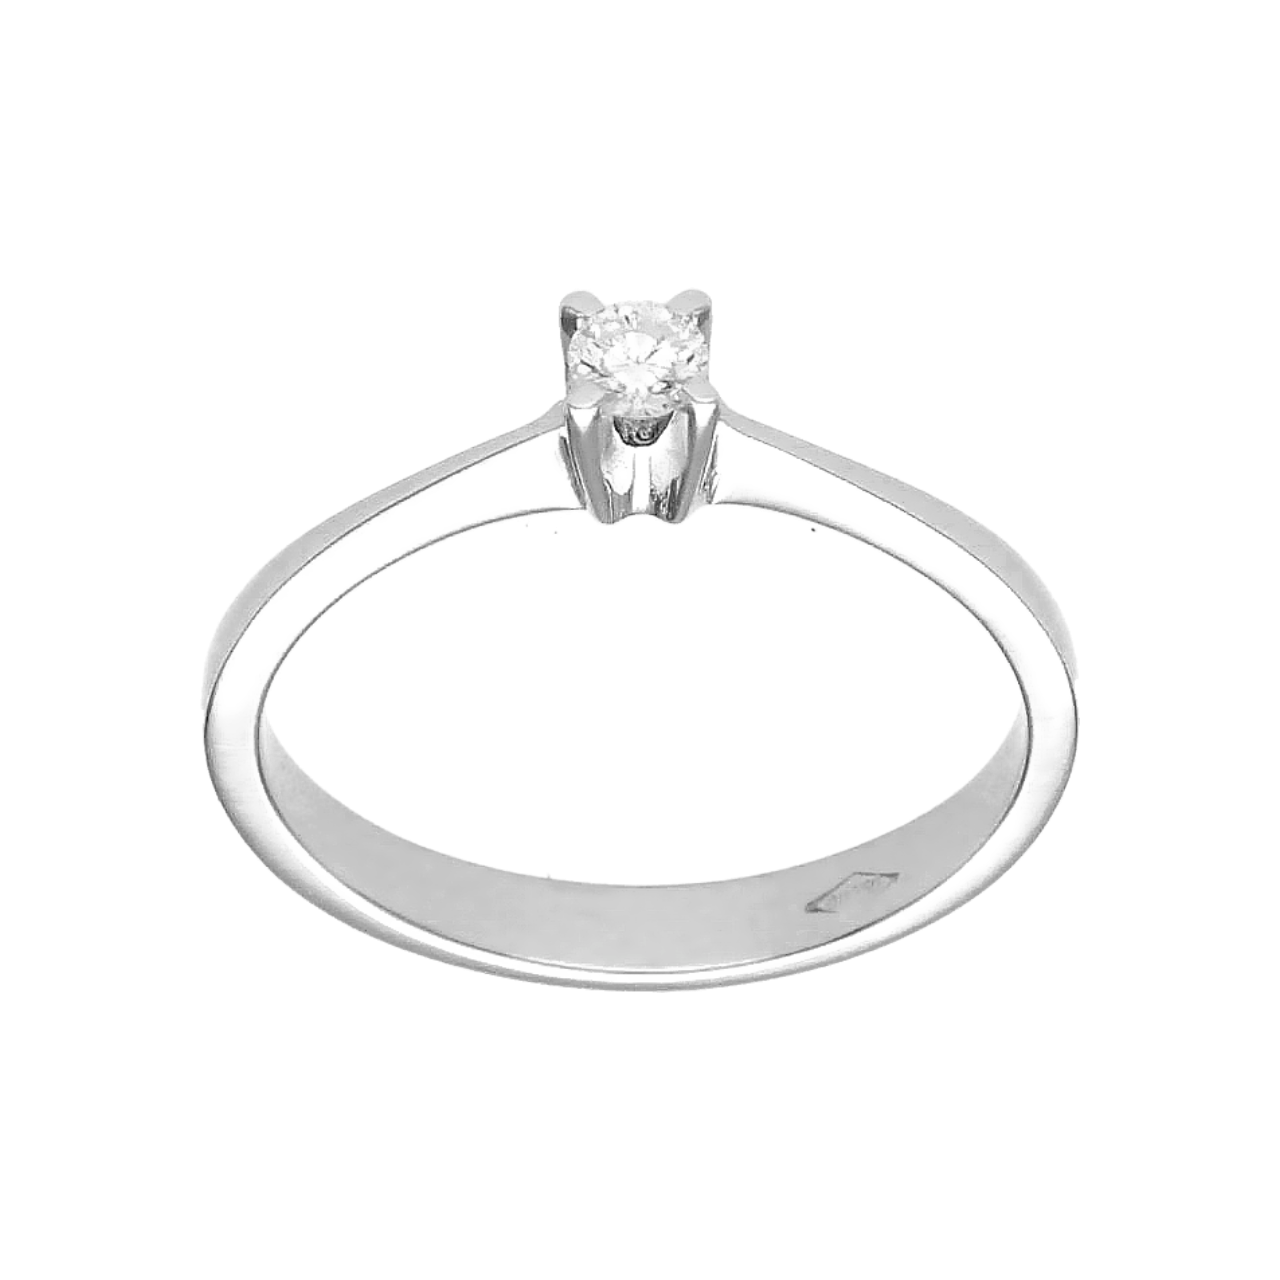 White gold solitary ring with 0.10. ct diamond